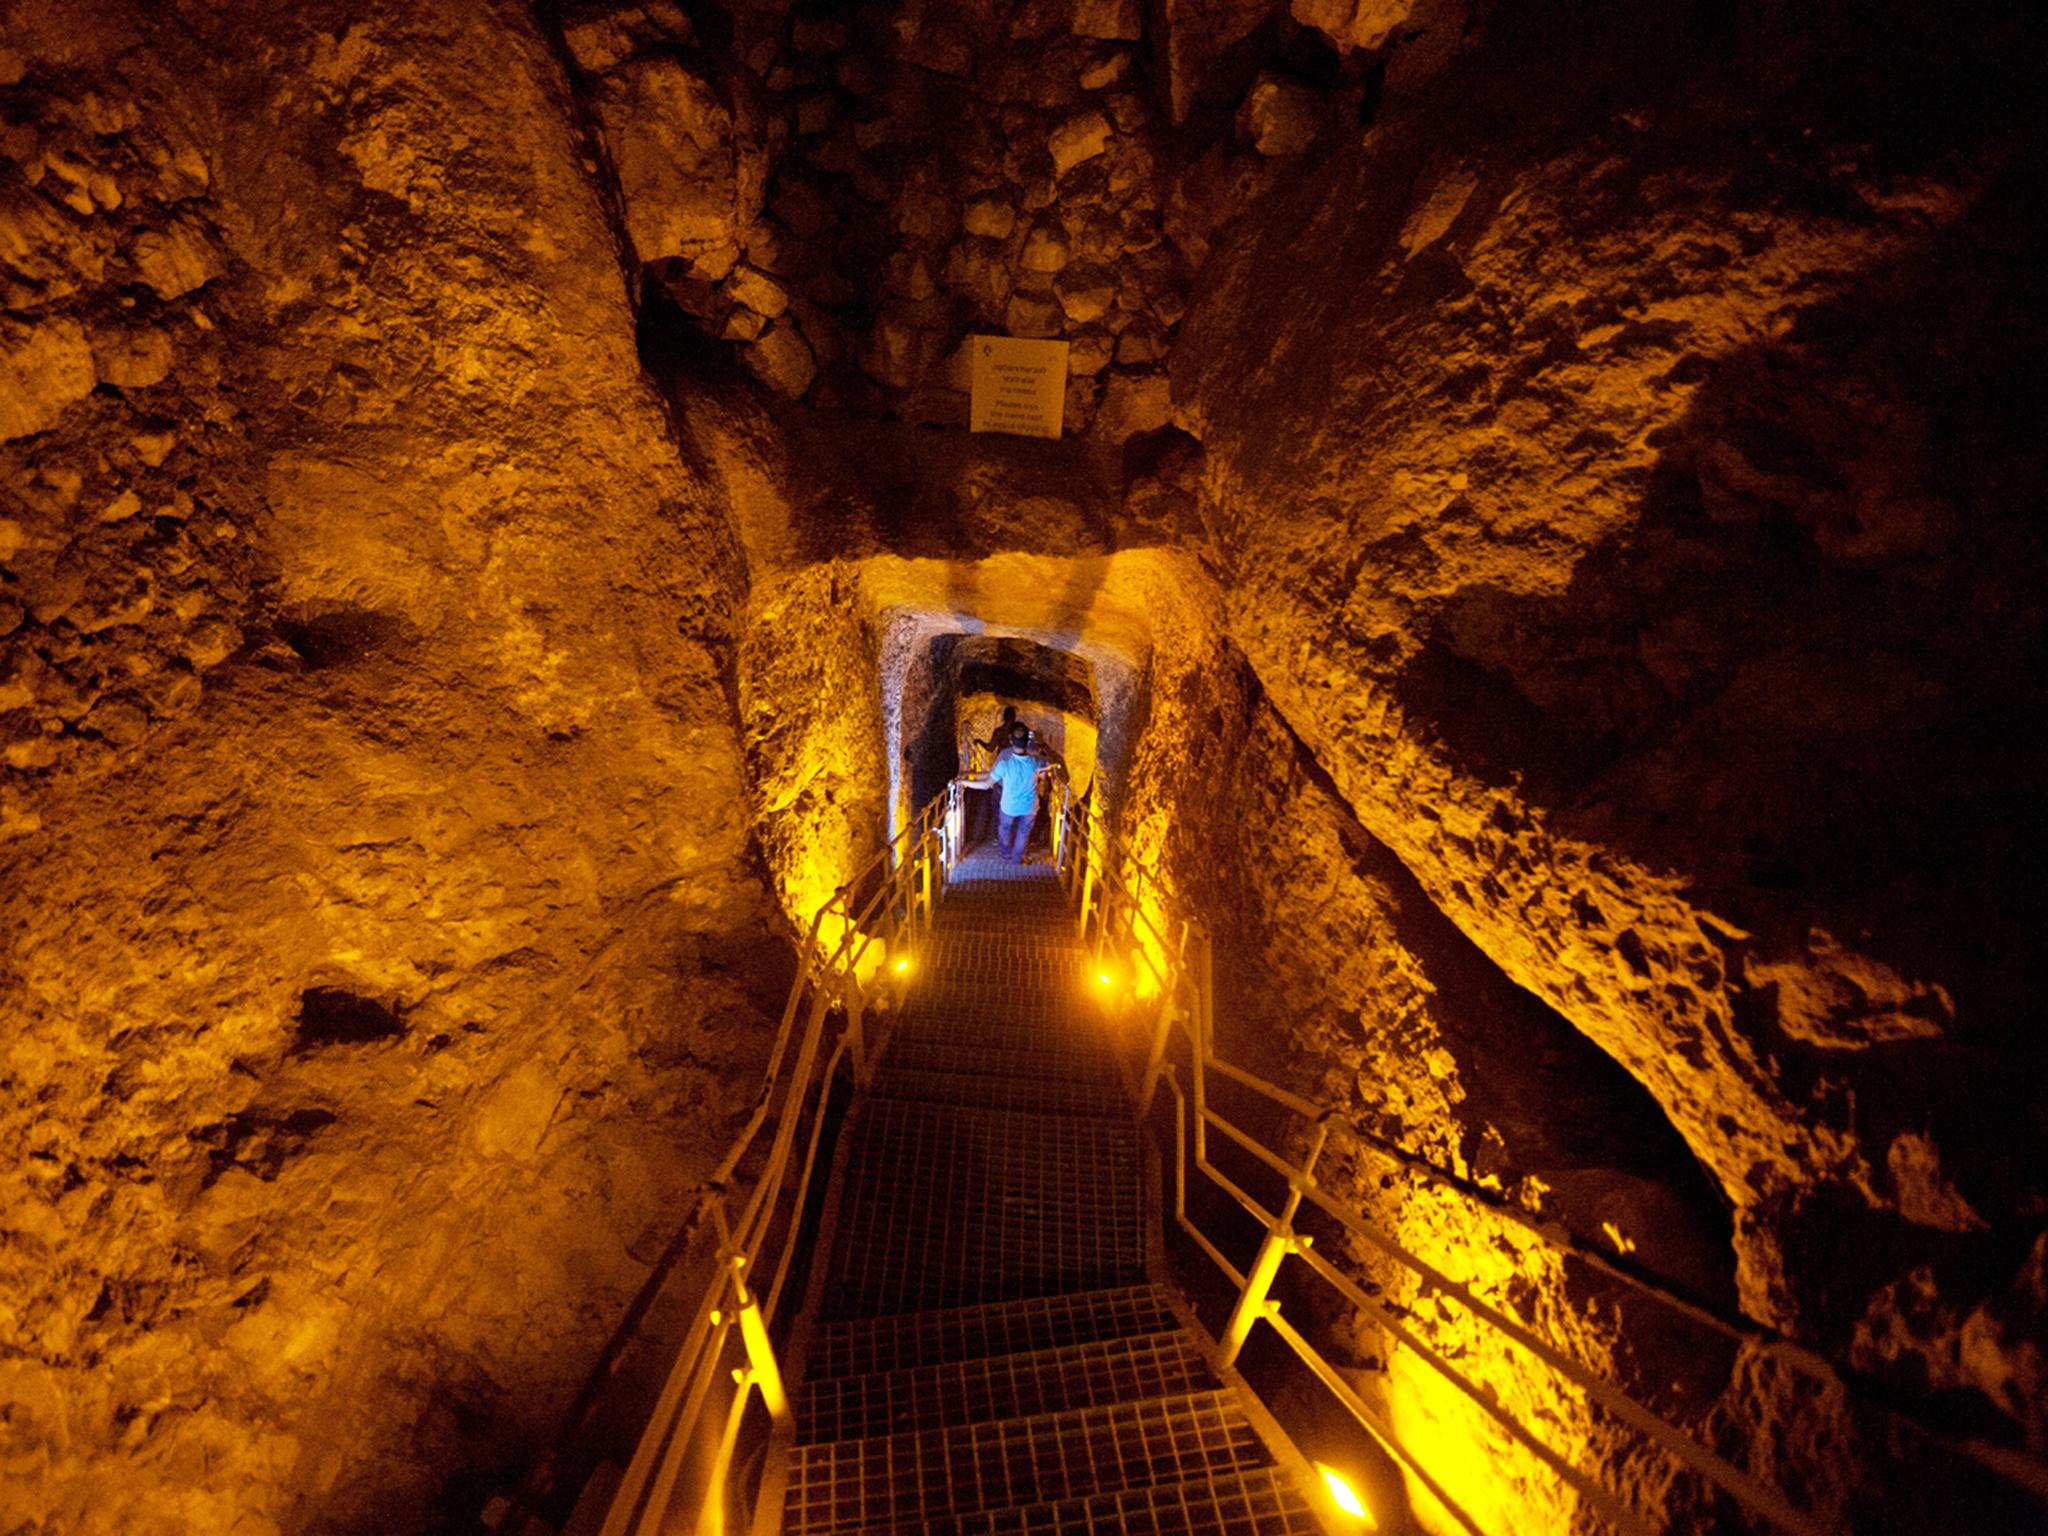 Excavators in tunnels in the City of David found burnt grape seeds, wood and pottery